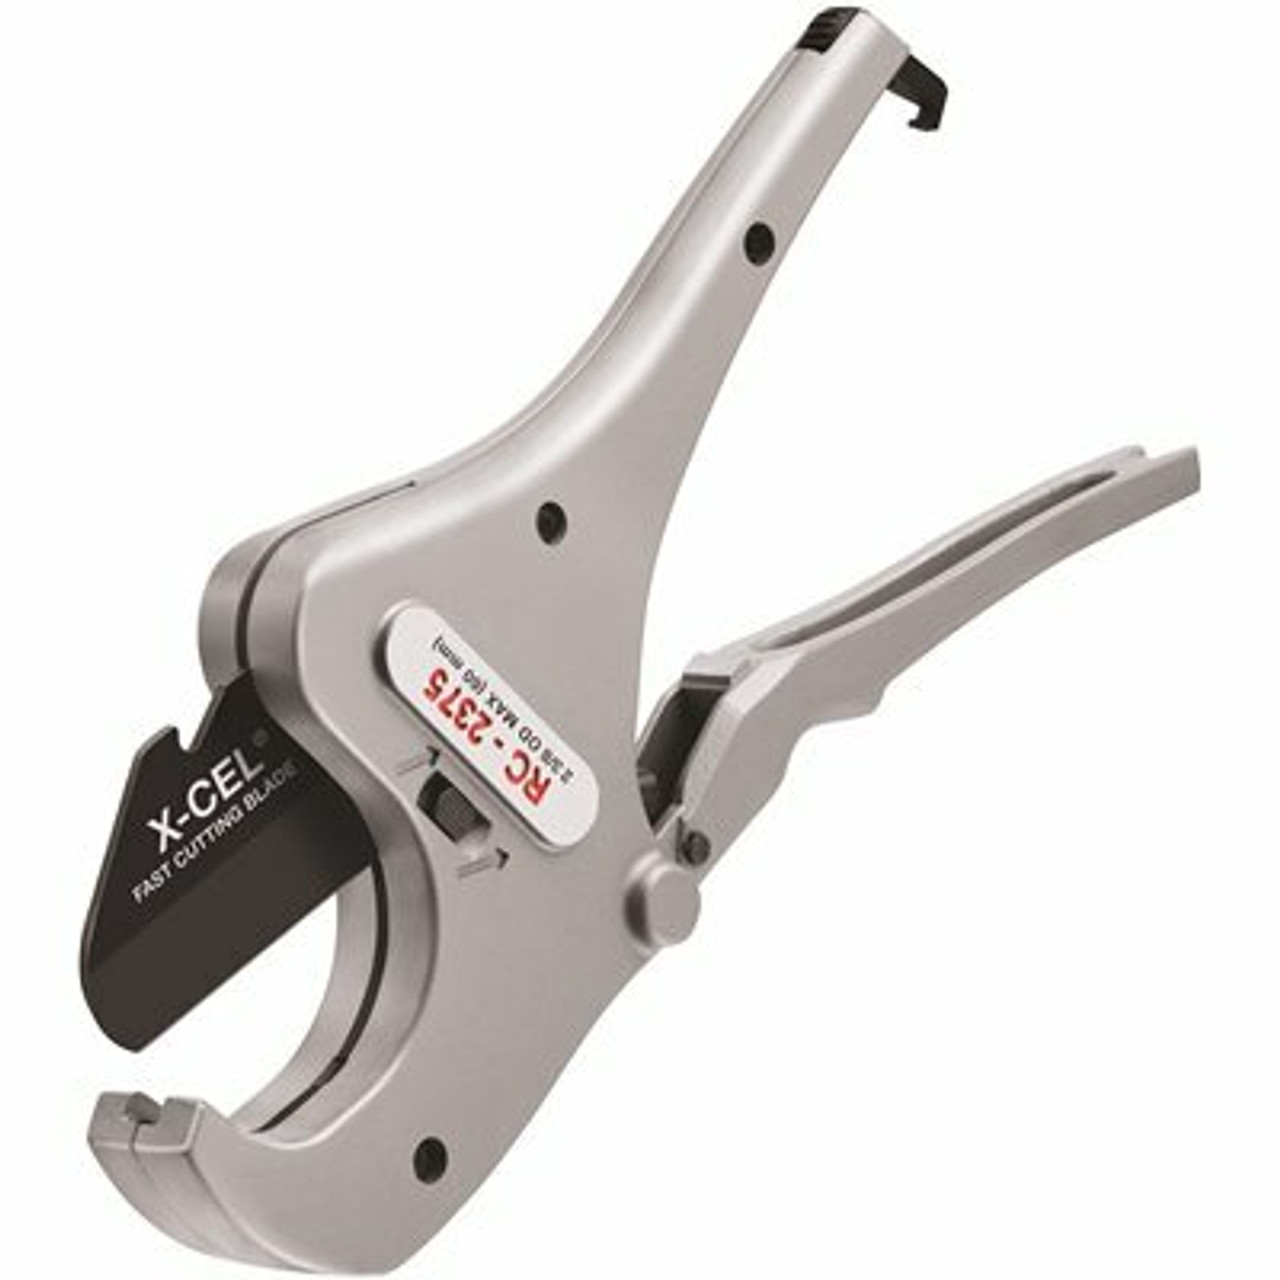 Ridgid 1/8 In. To 2-3/8 In. Rc-2375 Ratchet Action Plastic Pipe And Tubing Cutter